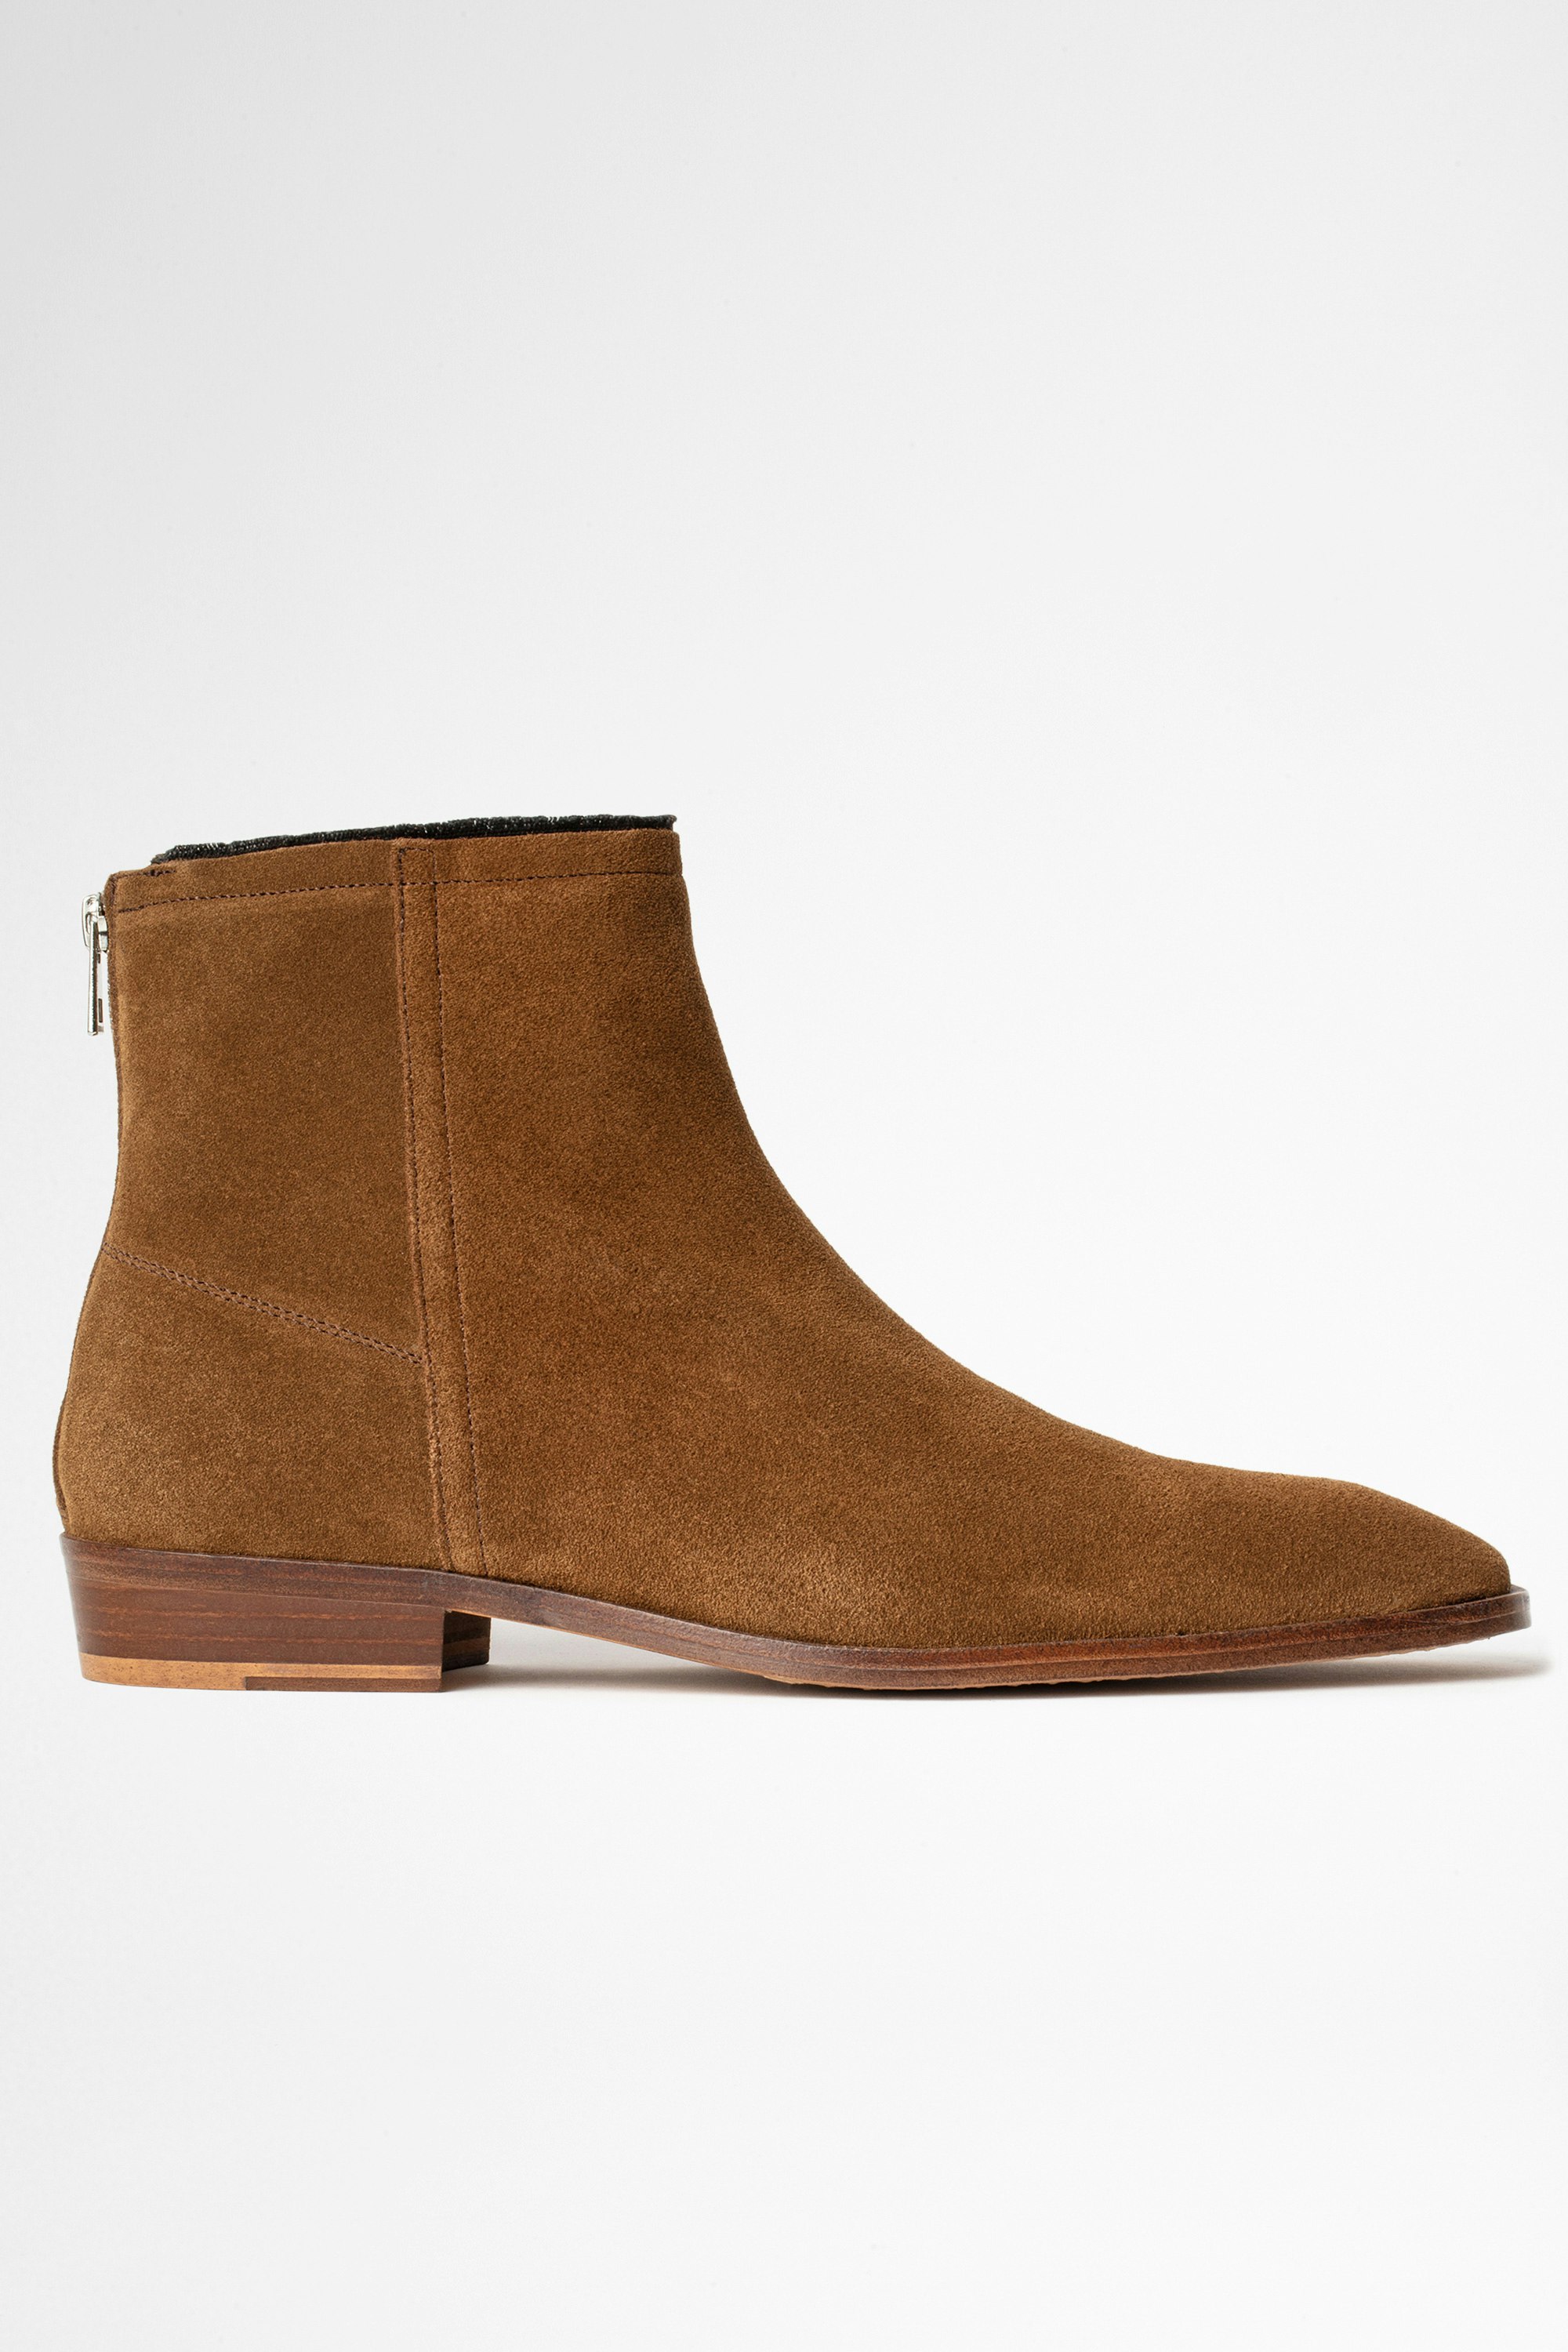 Romare Suede Ankle レザーブーツ  Men's cognac suede ankle boots